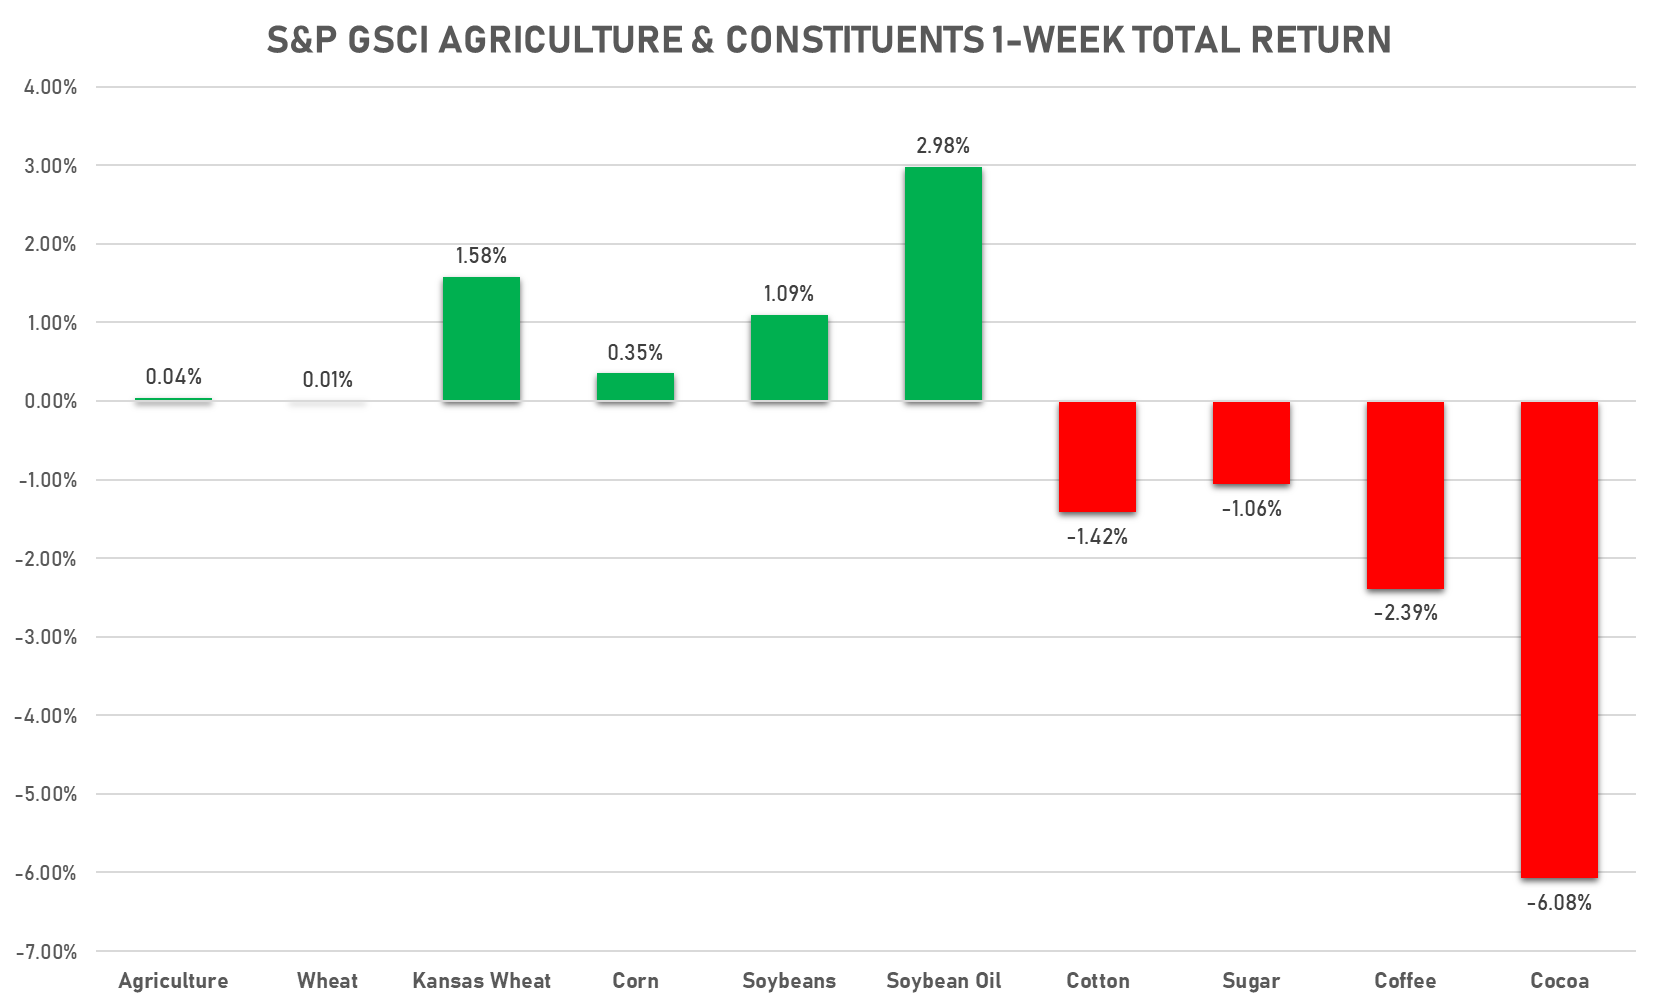 GSCI Agriculture This Week 2/18/22 | Sources: phipost.com, FactSet data